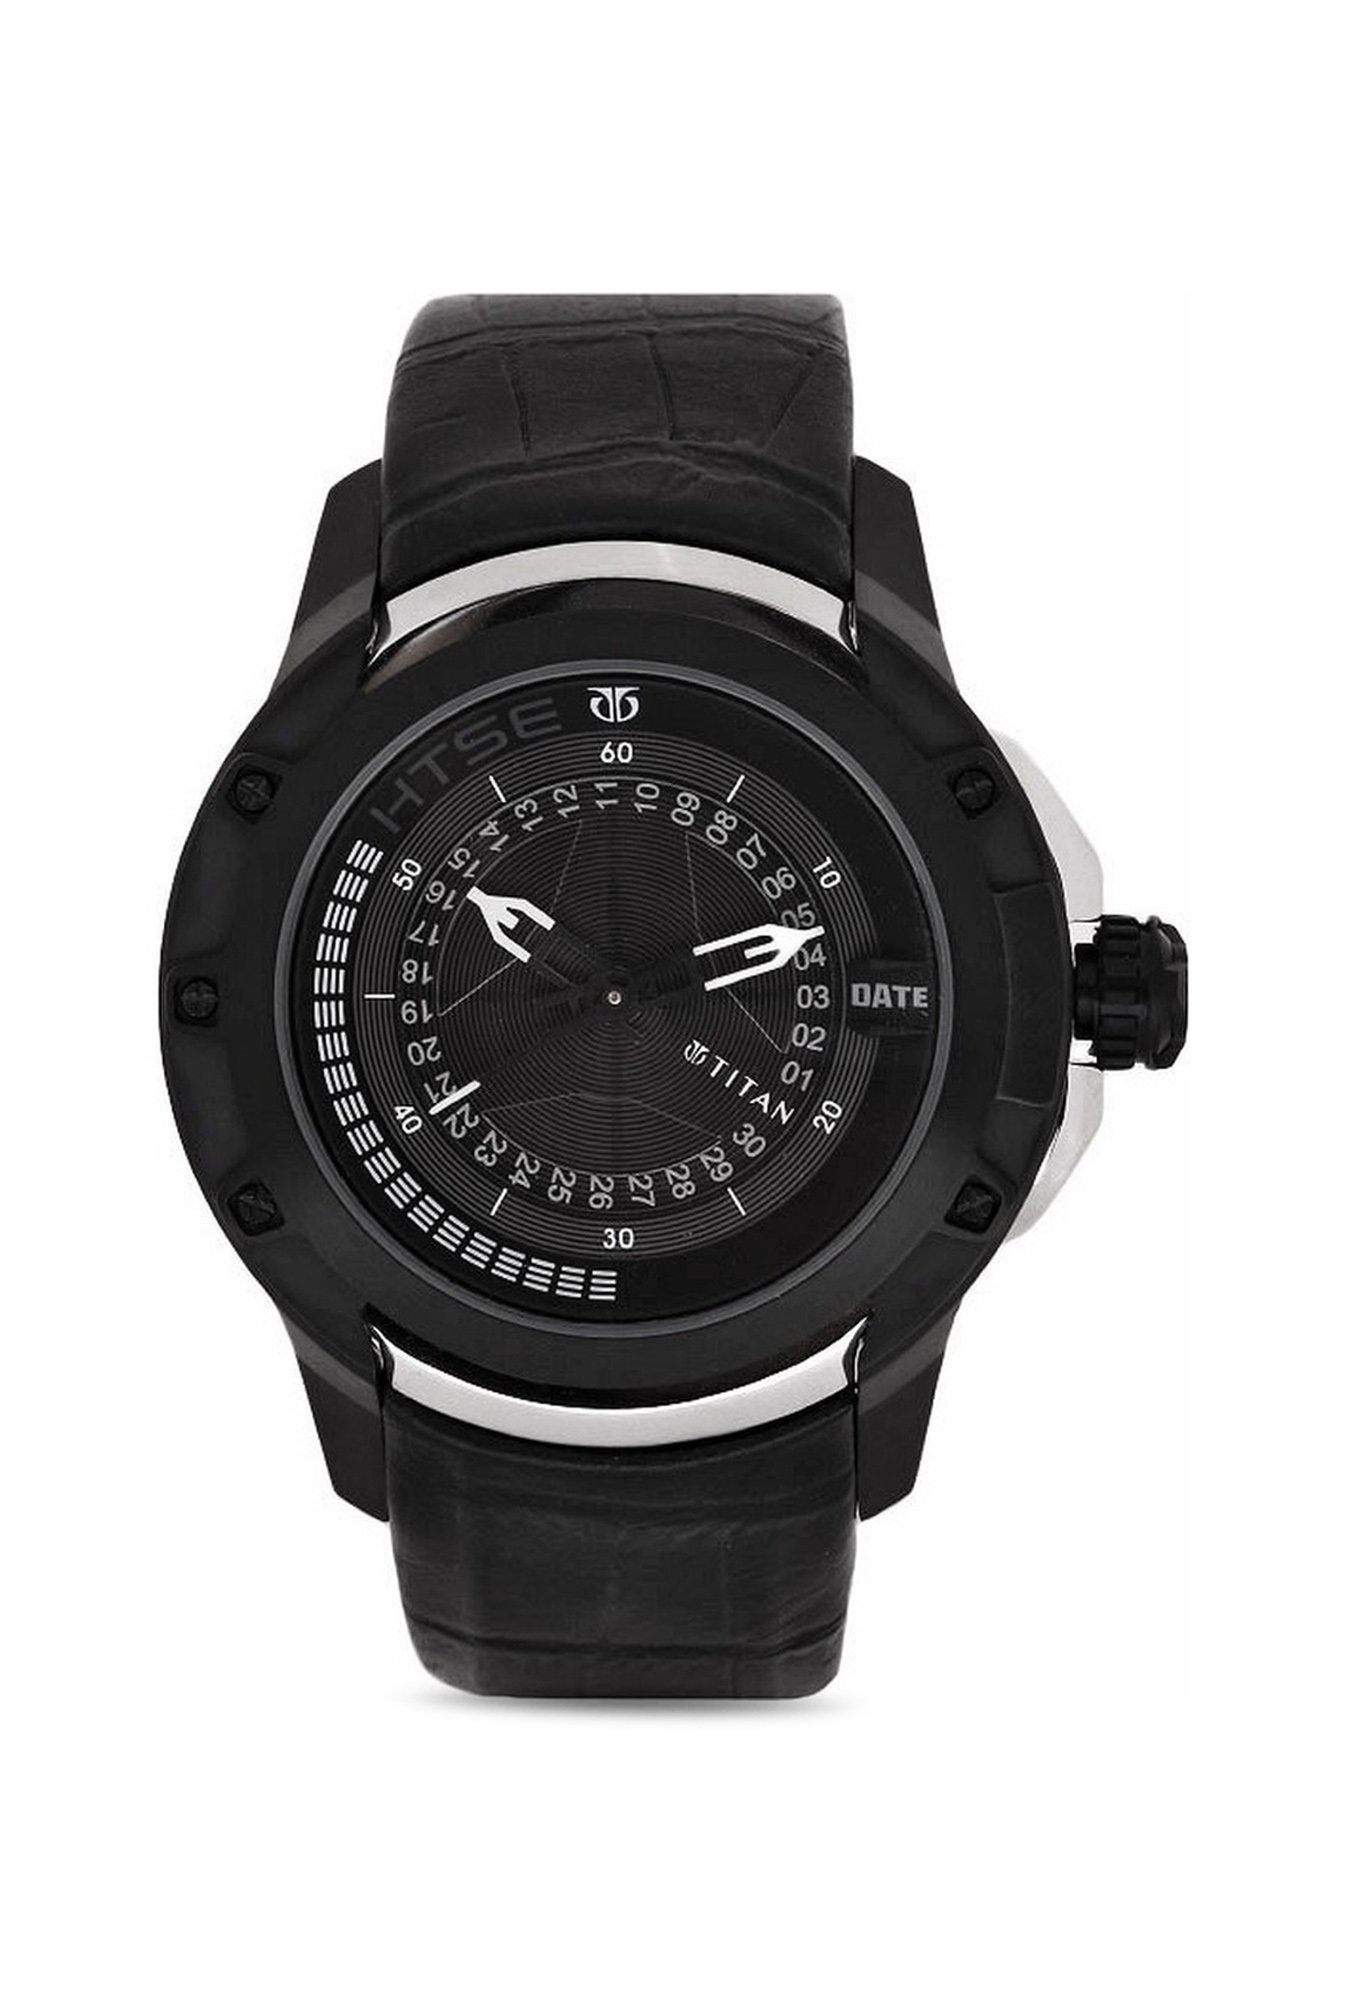 TITAN Black Dial Black Leather Strap HTSE Watch in Delhi at best price by  Varun Watches Pvt Ltd - Justdial